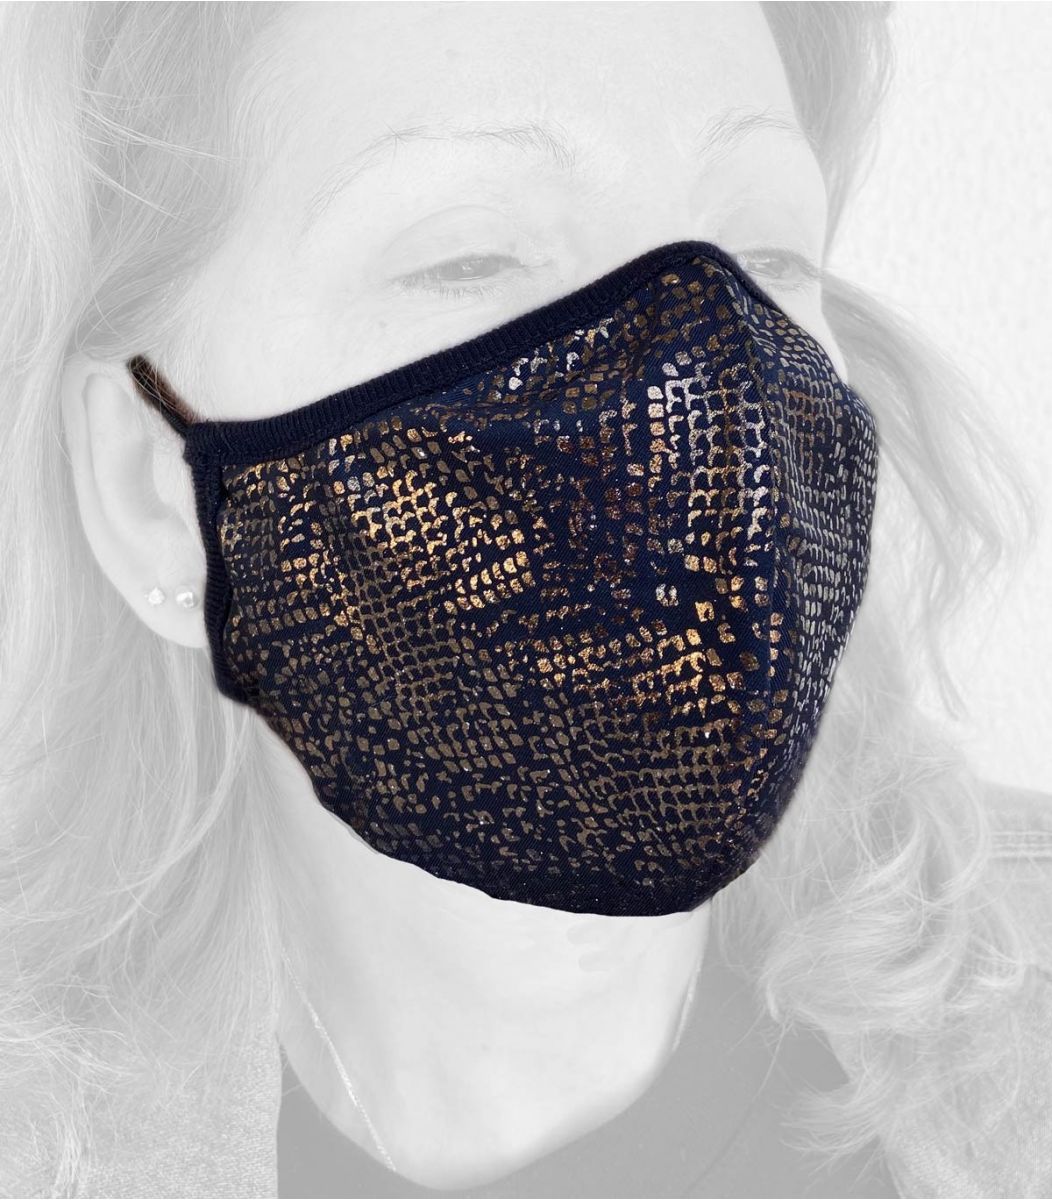  Lord Offers Woman Reusable Mask, rubber band- 7